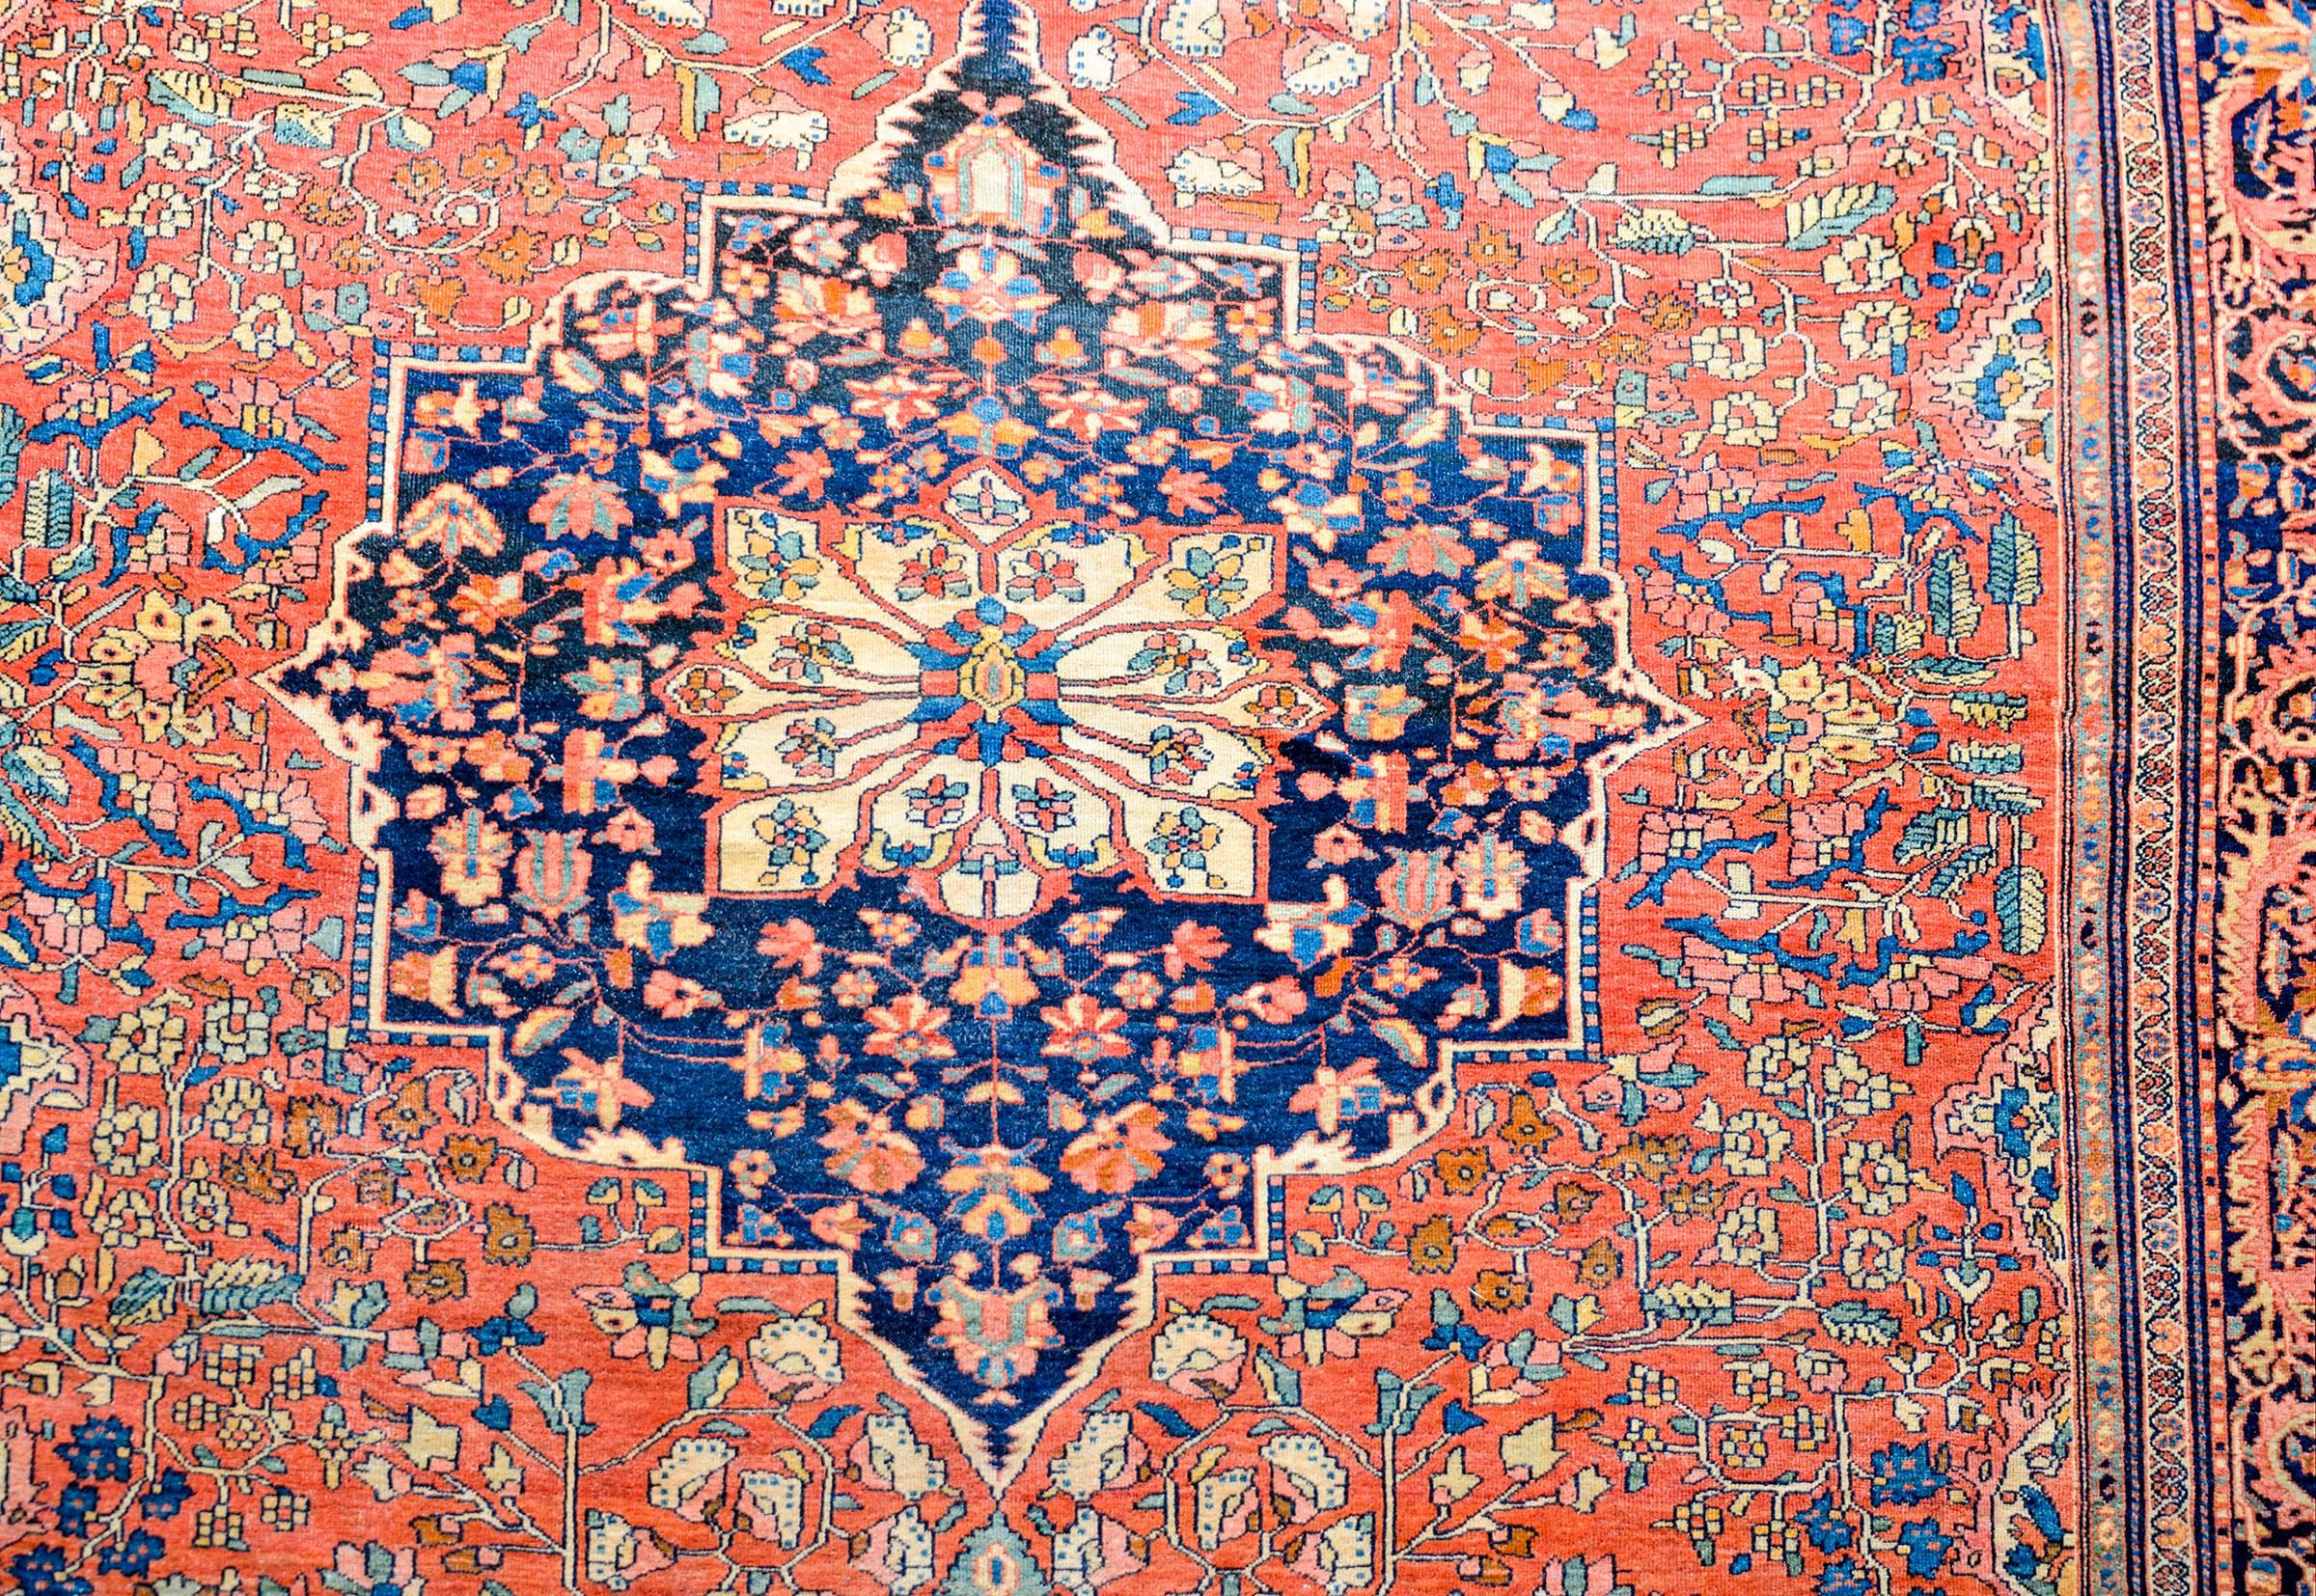 An extraordinary late 19th century Persian Sarouk Farahan rug with an incredible predominantly crimson color way. There is a large medallion on a field of intensely woven flowering vines, surrounded by a contrasting border with a large-scale floral